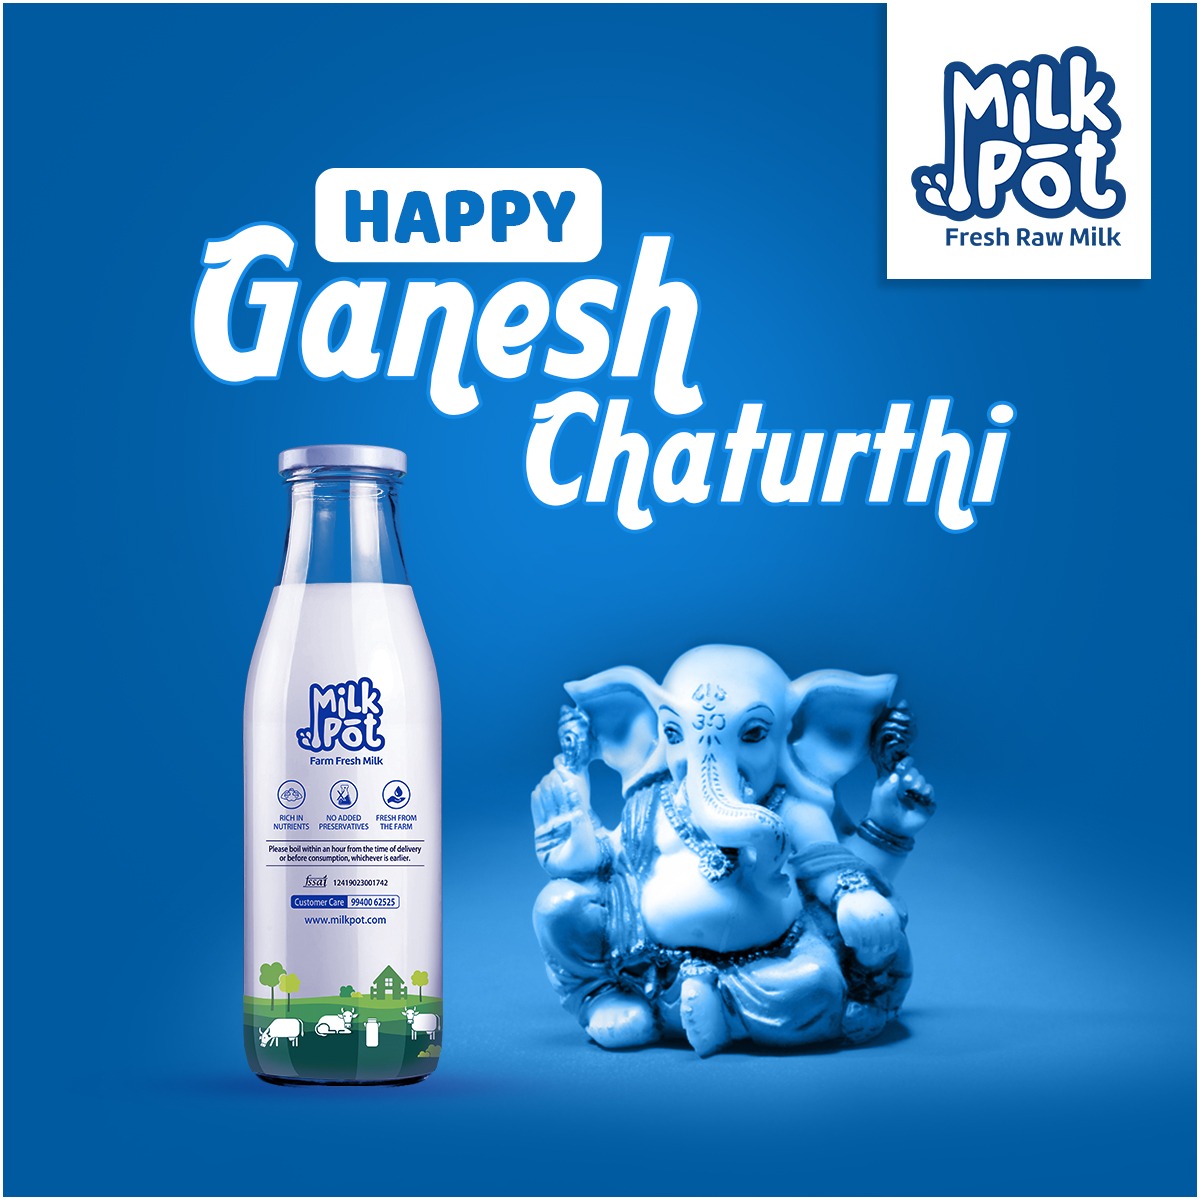 On the happy occasion of Ganesh Chaturthi, Milkpot wishes that good fortune may always be on your side. Special offerings and  purifying quality of milk adds extra significance in this festival season.

#milk #milkpot #farmfreshmilk #freshmilk #imagination #butterfly #puremilk